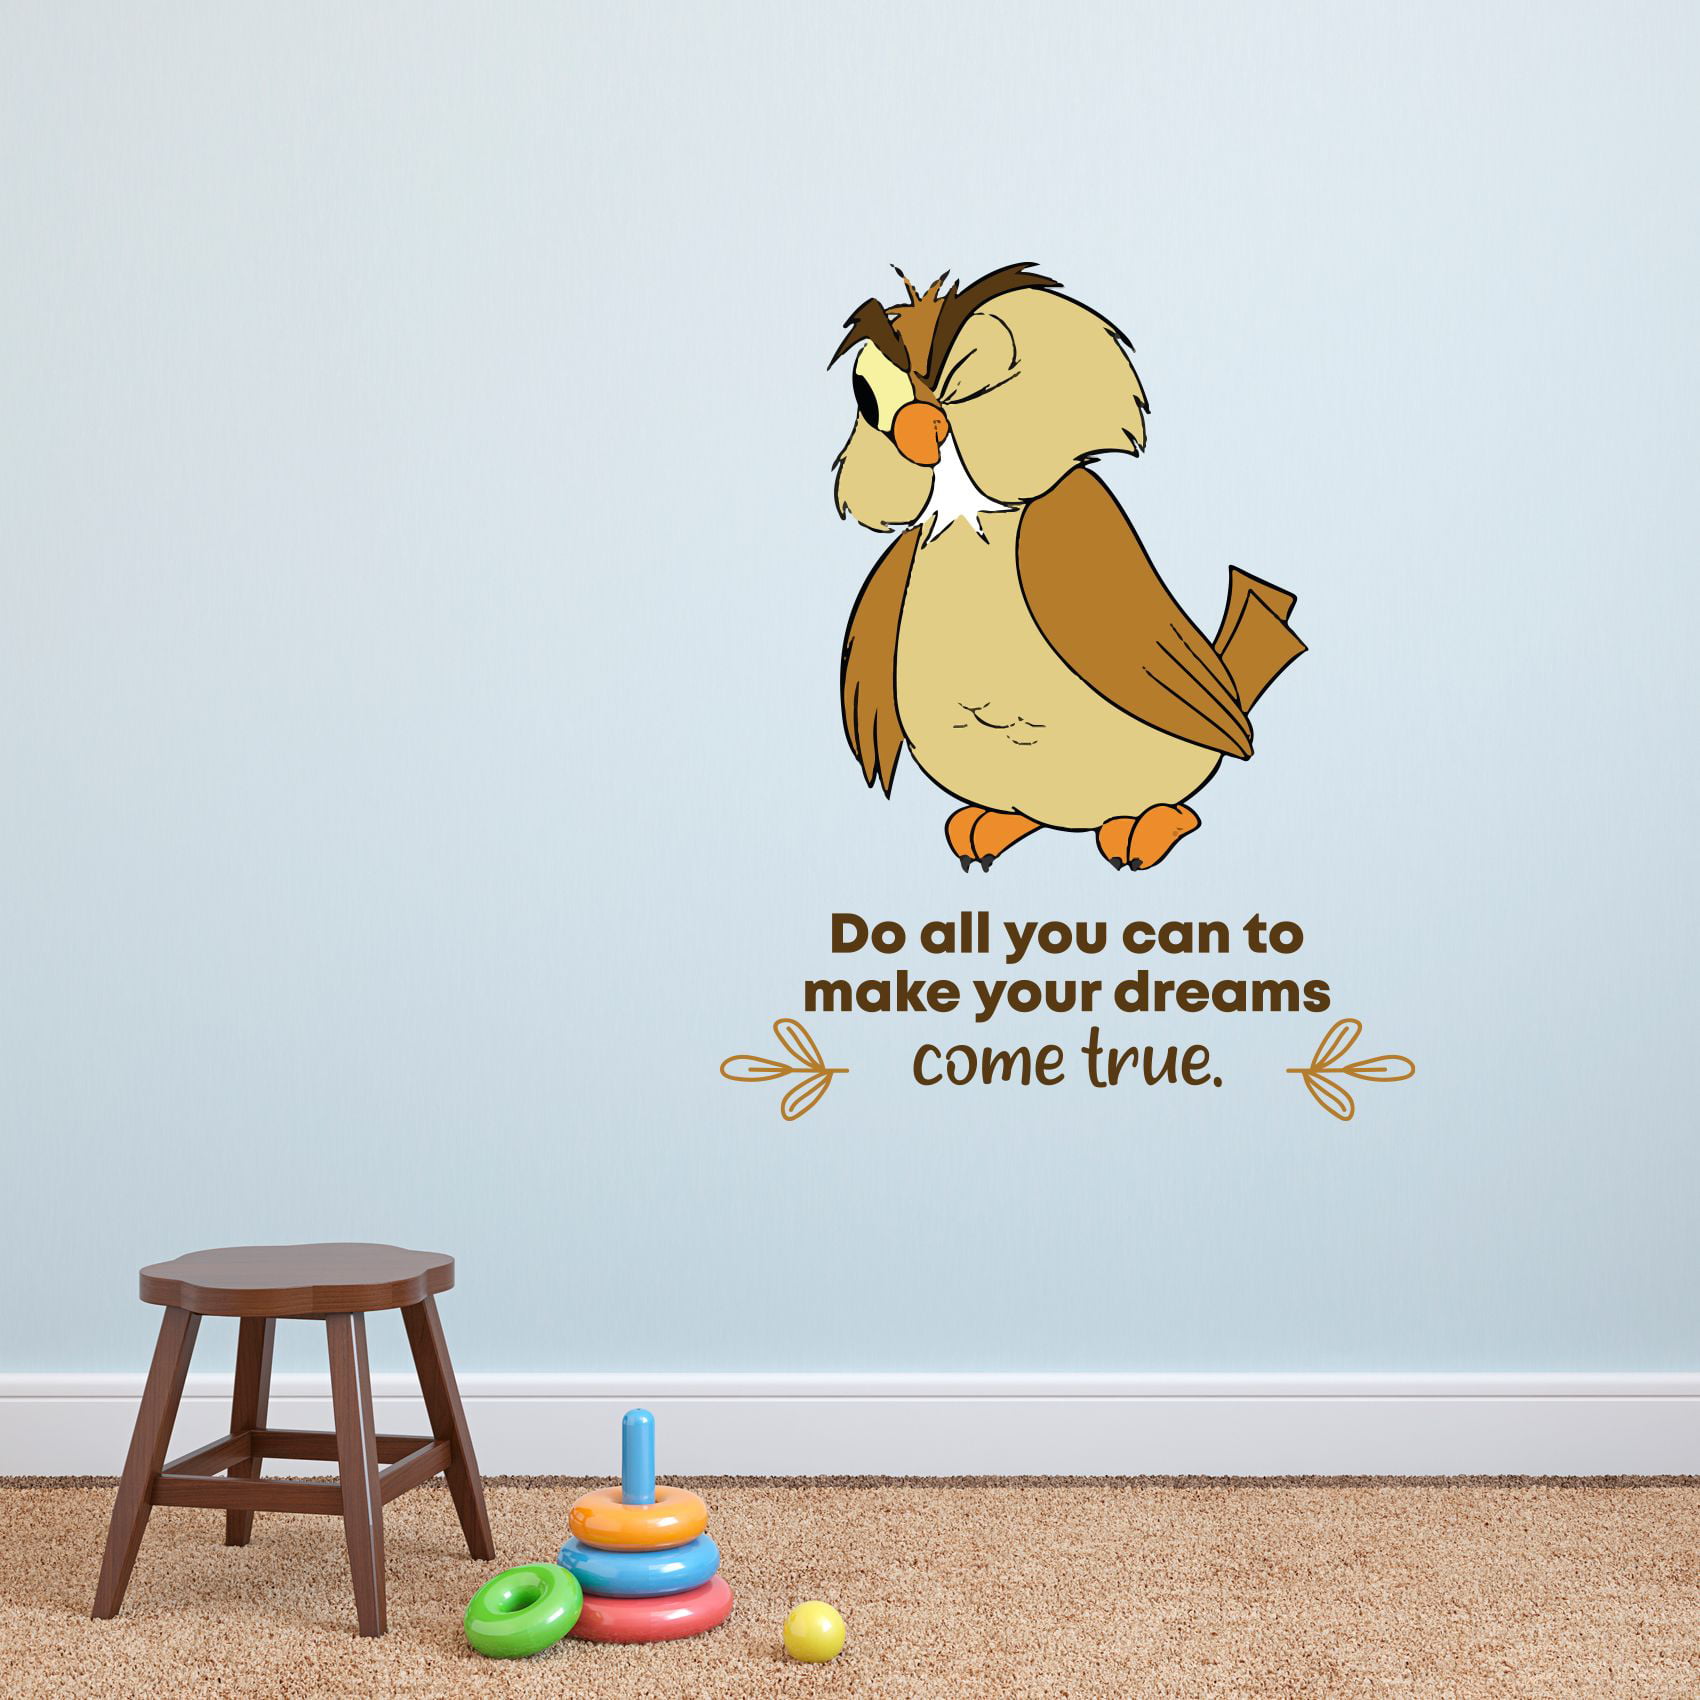 Harry Potter Vinyl Wall Decal Quote Home Decor Bedroom Art Owl Tree Wall Sticker 